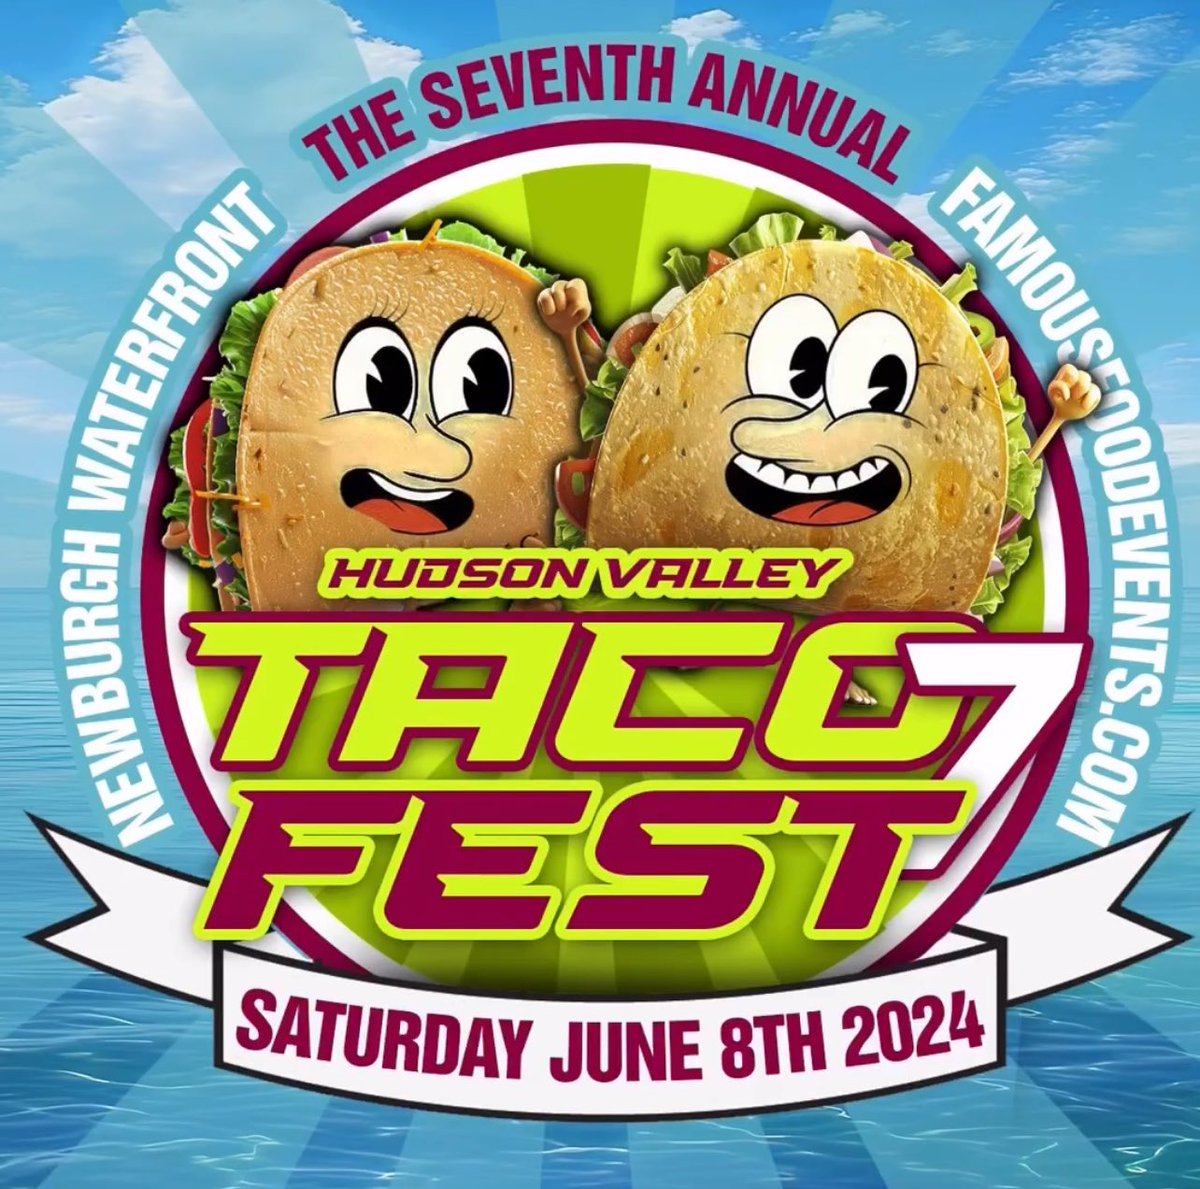 ONE MONTH AWAY FROM THE 7th Annual #HudsonValley #TACOFEST famousfoodevents.com for #Tickets 🌮🌮🌮🌮🌮 @ The #NewburghWaterFront #SATURDAY JUNE 8th brought to you by #famousfoodevents #nbny #Newburgh #845 #329 #914 #OrangeCounty #NewYork #Summer #2024 #TacoFestival